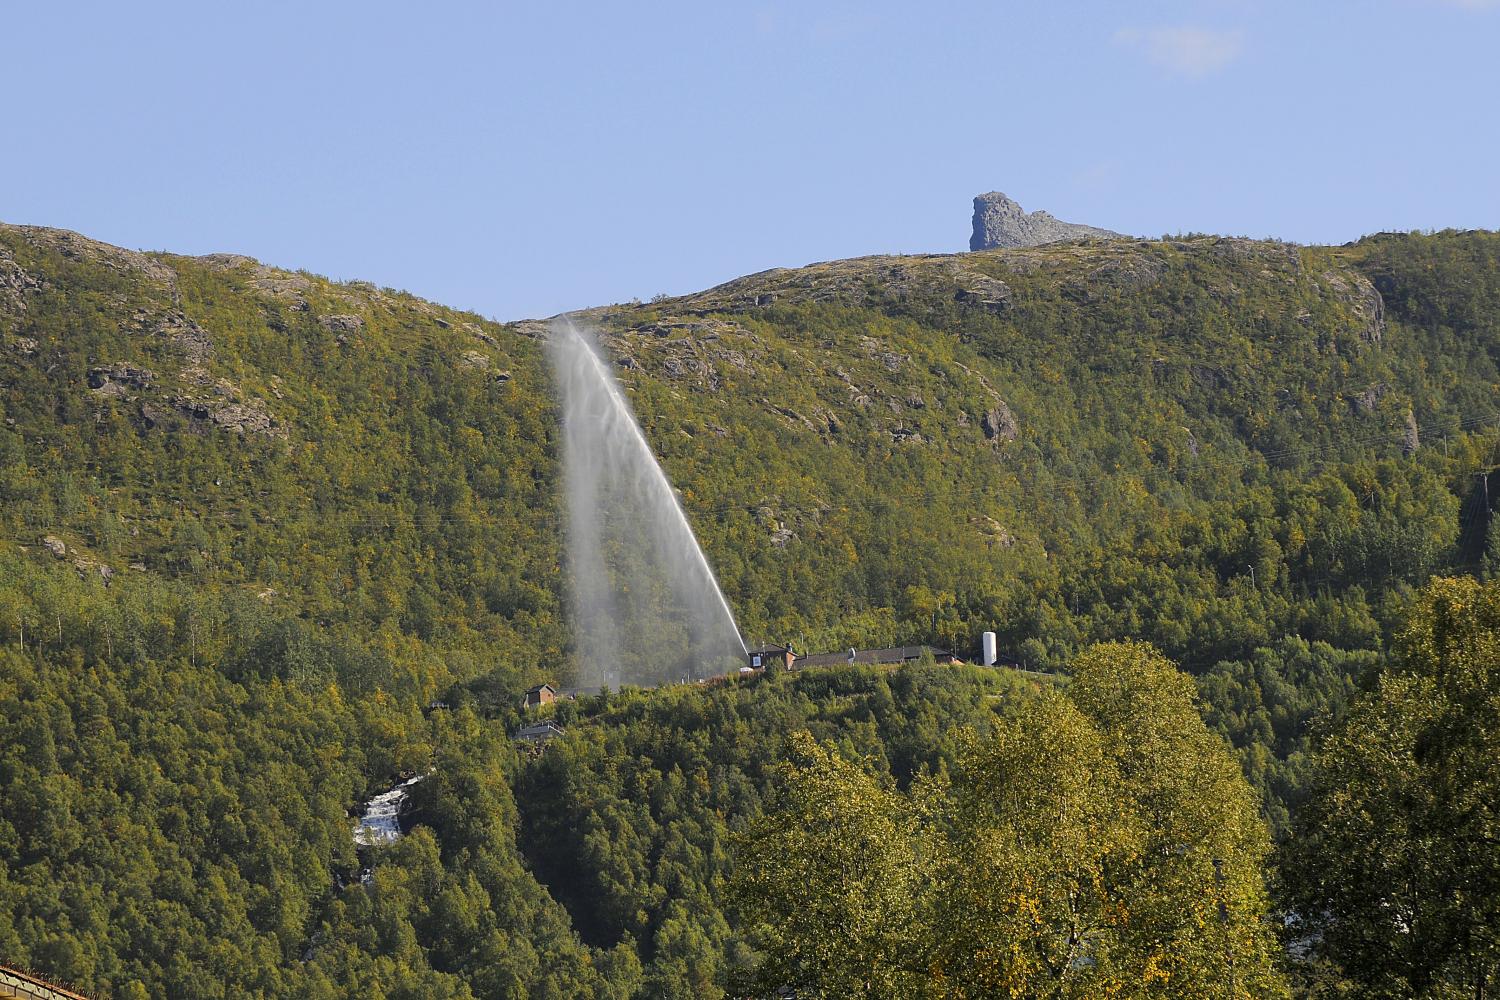 The Geysir viewpoint in Narvik